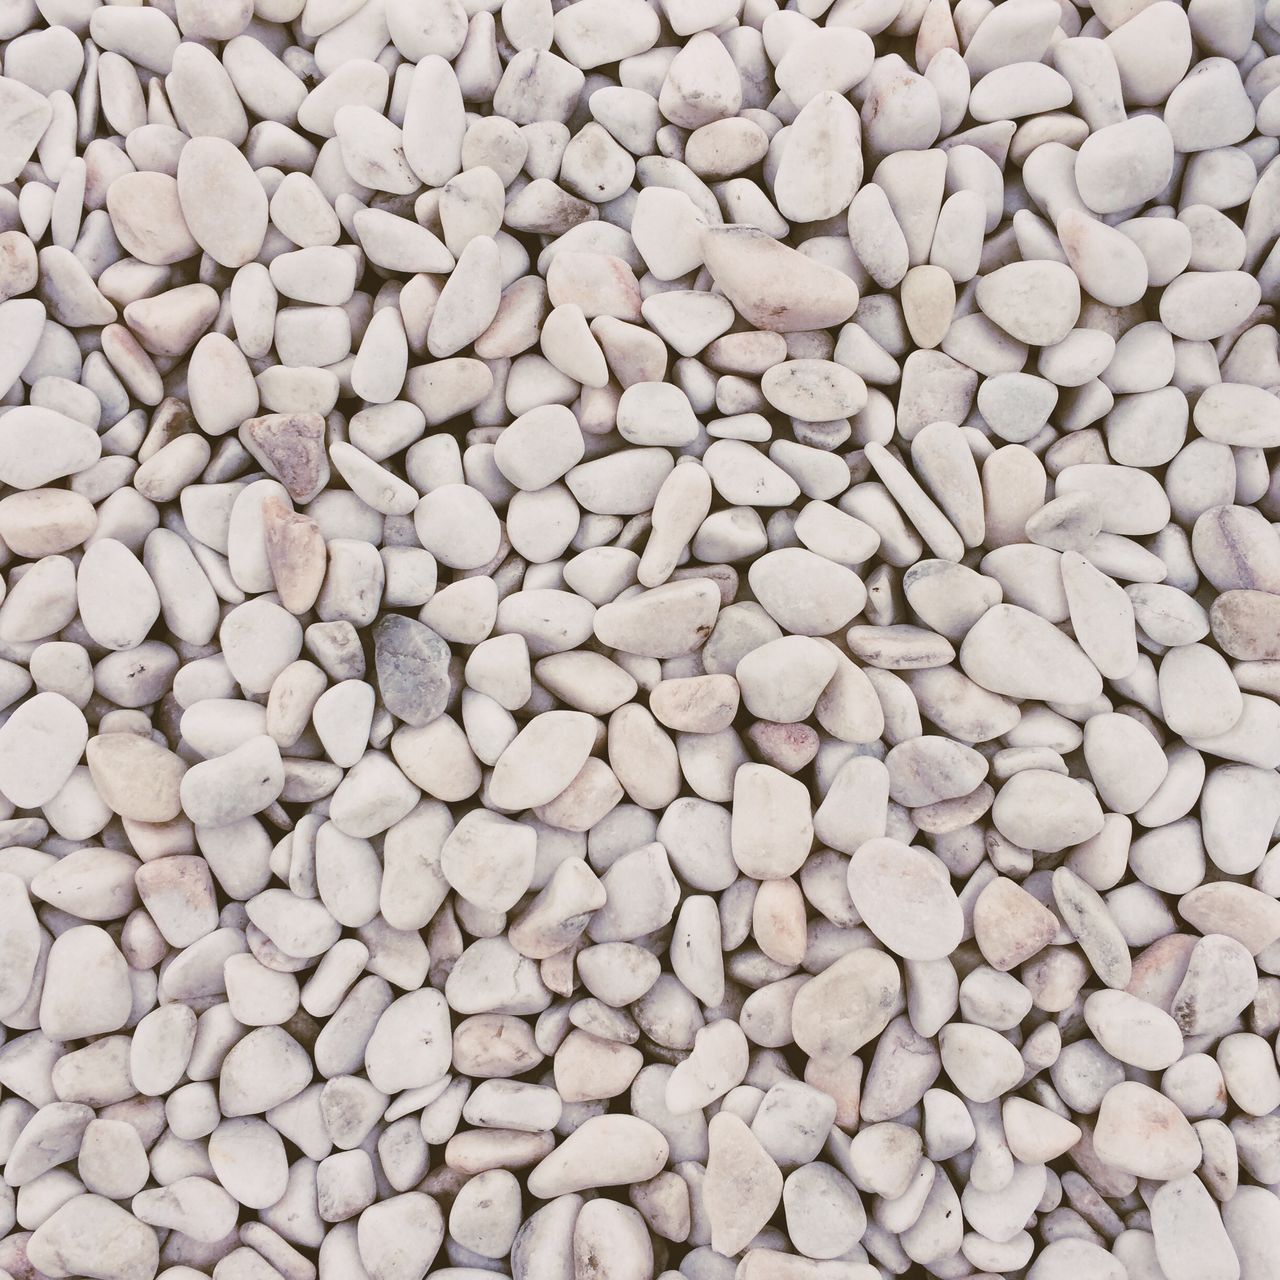 Extreme close up of pebbles